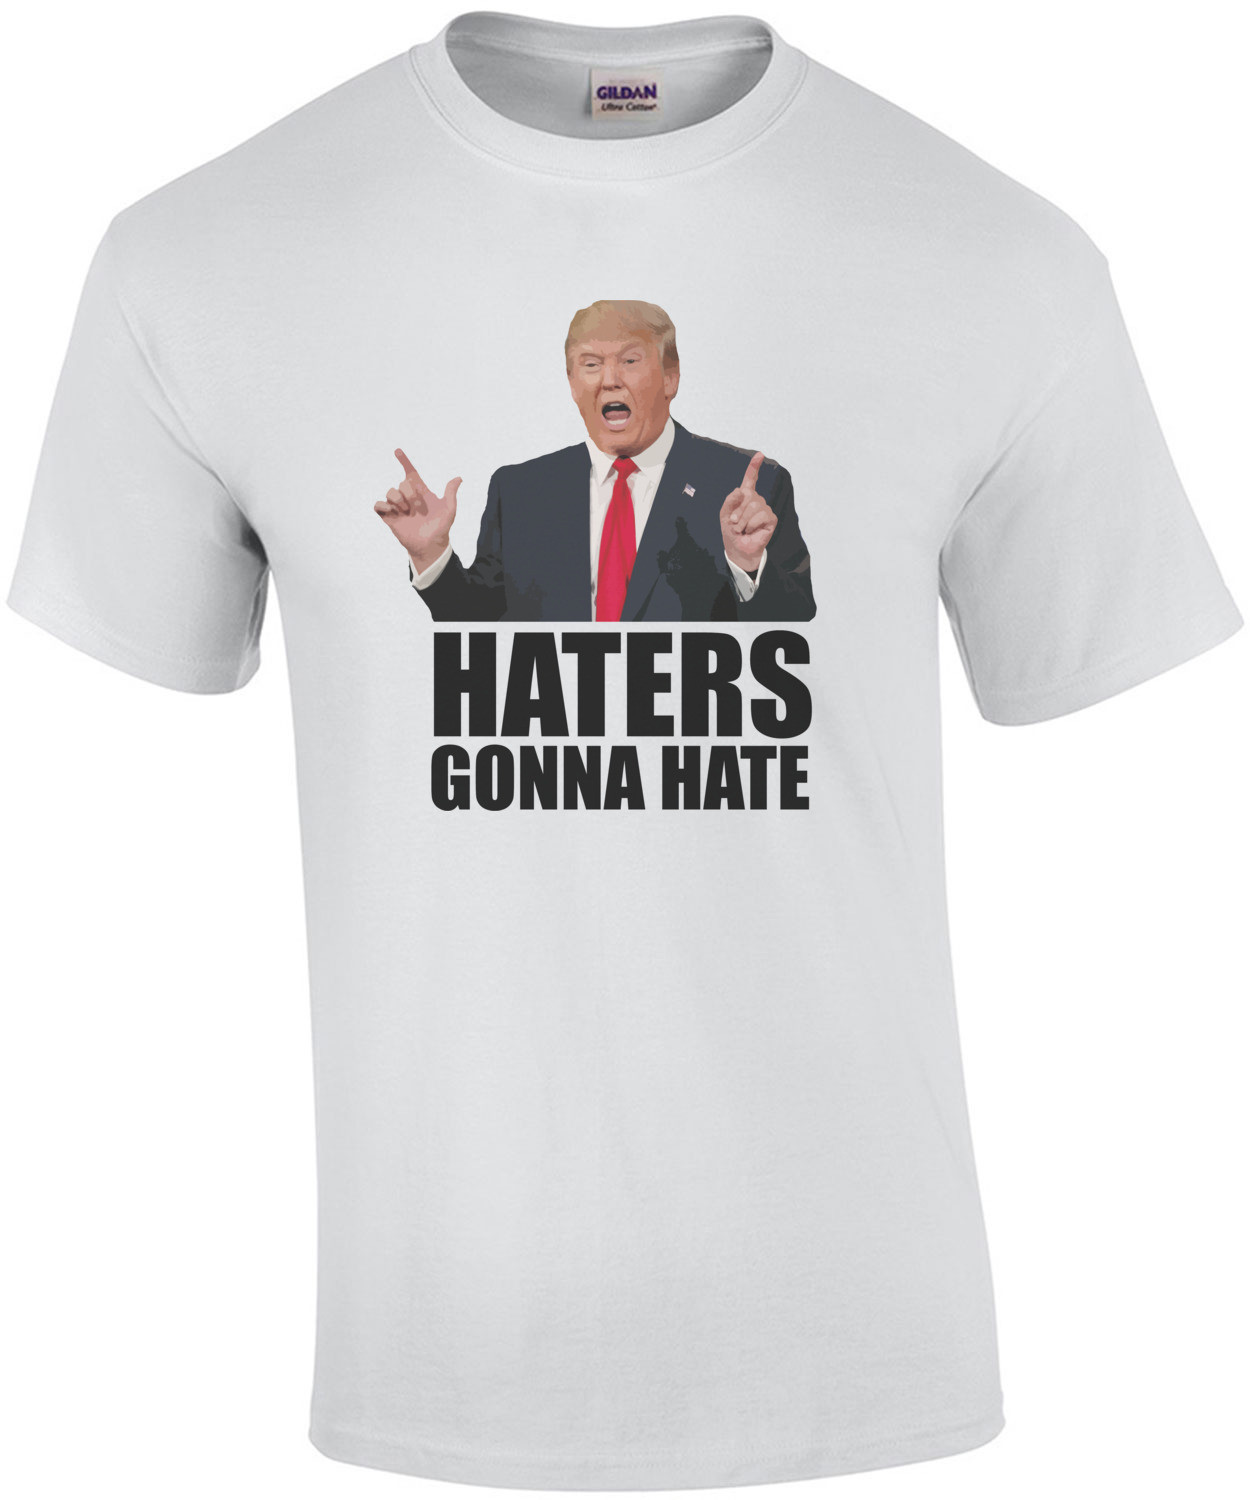 Haters gonna hate - Donald Trump Ash T-Shirt